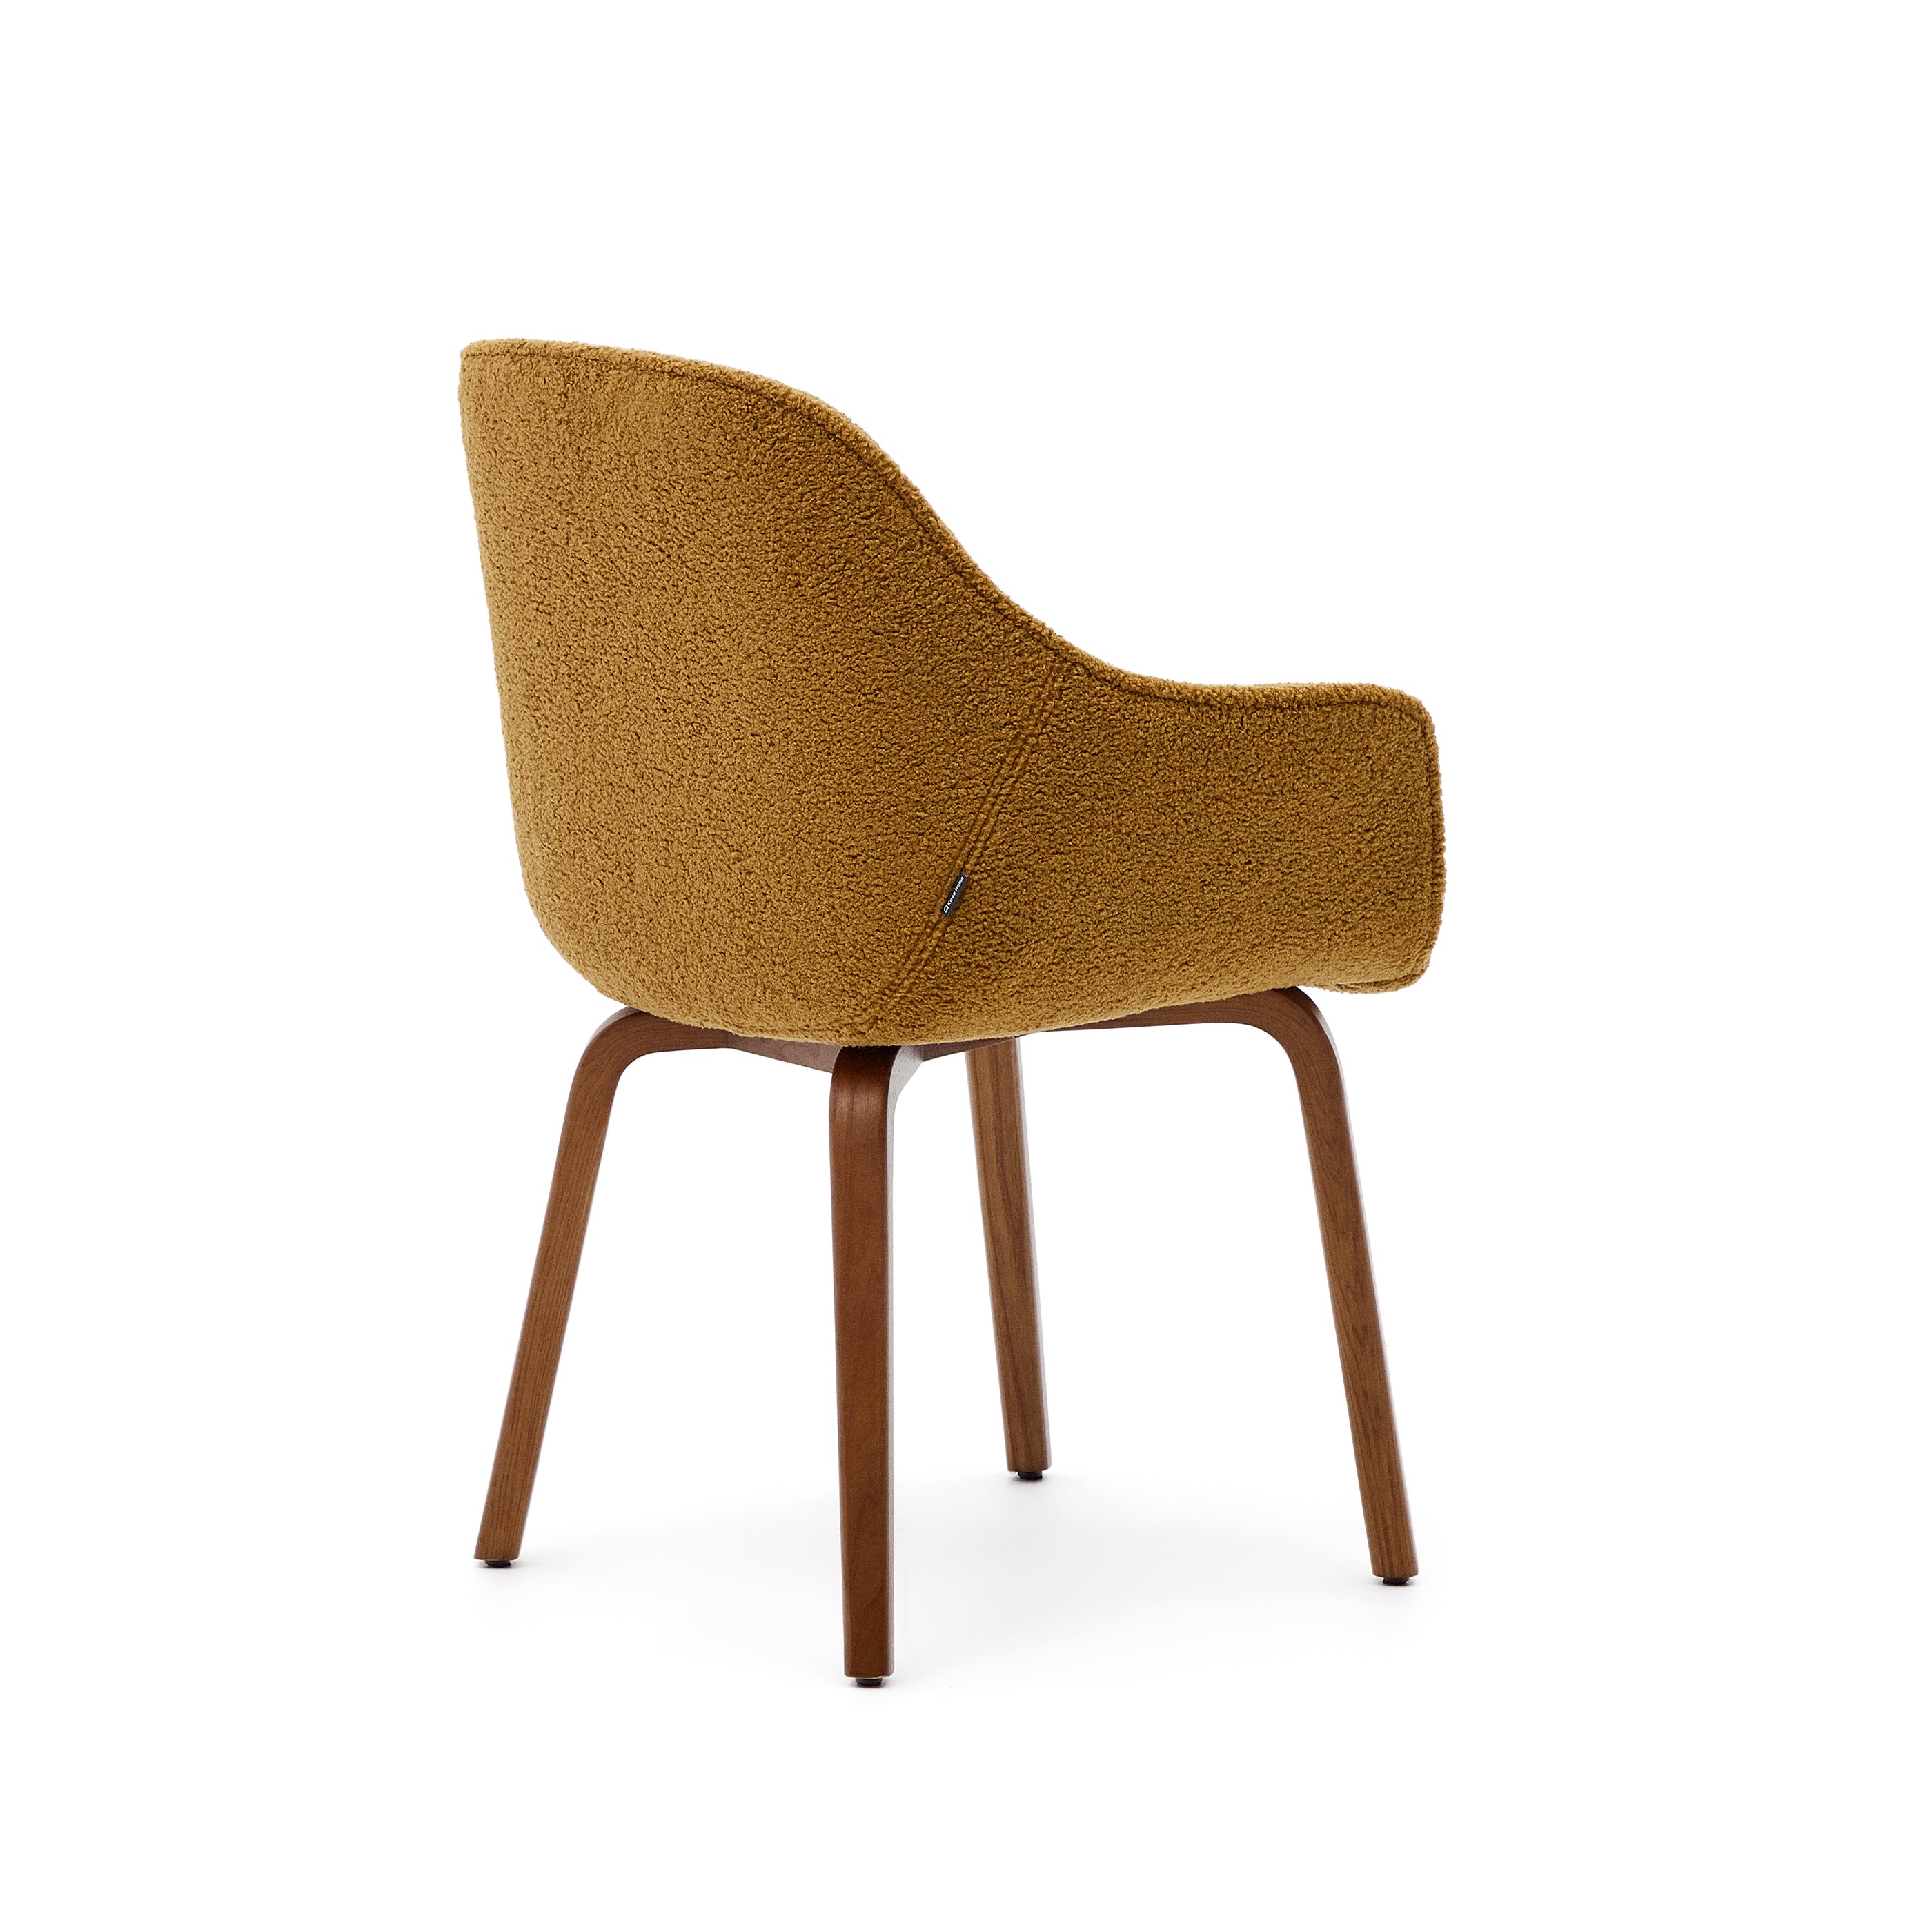 Aleli chair in mustard shearling with solid ash wood legs and walnut finish